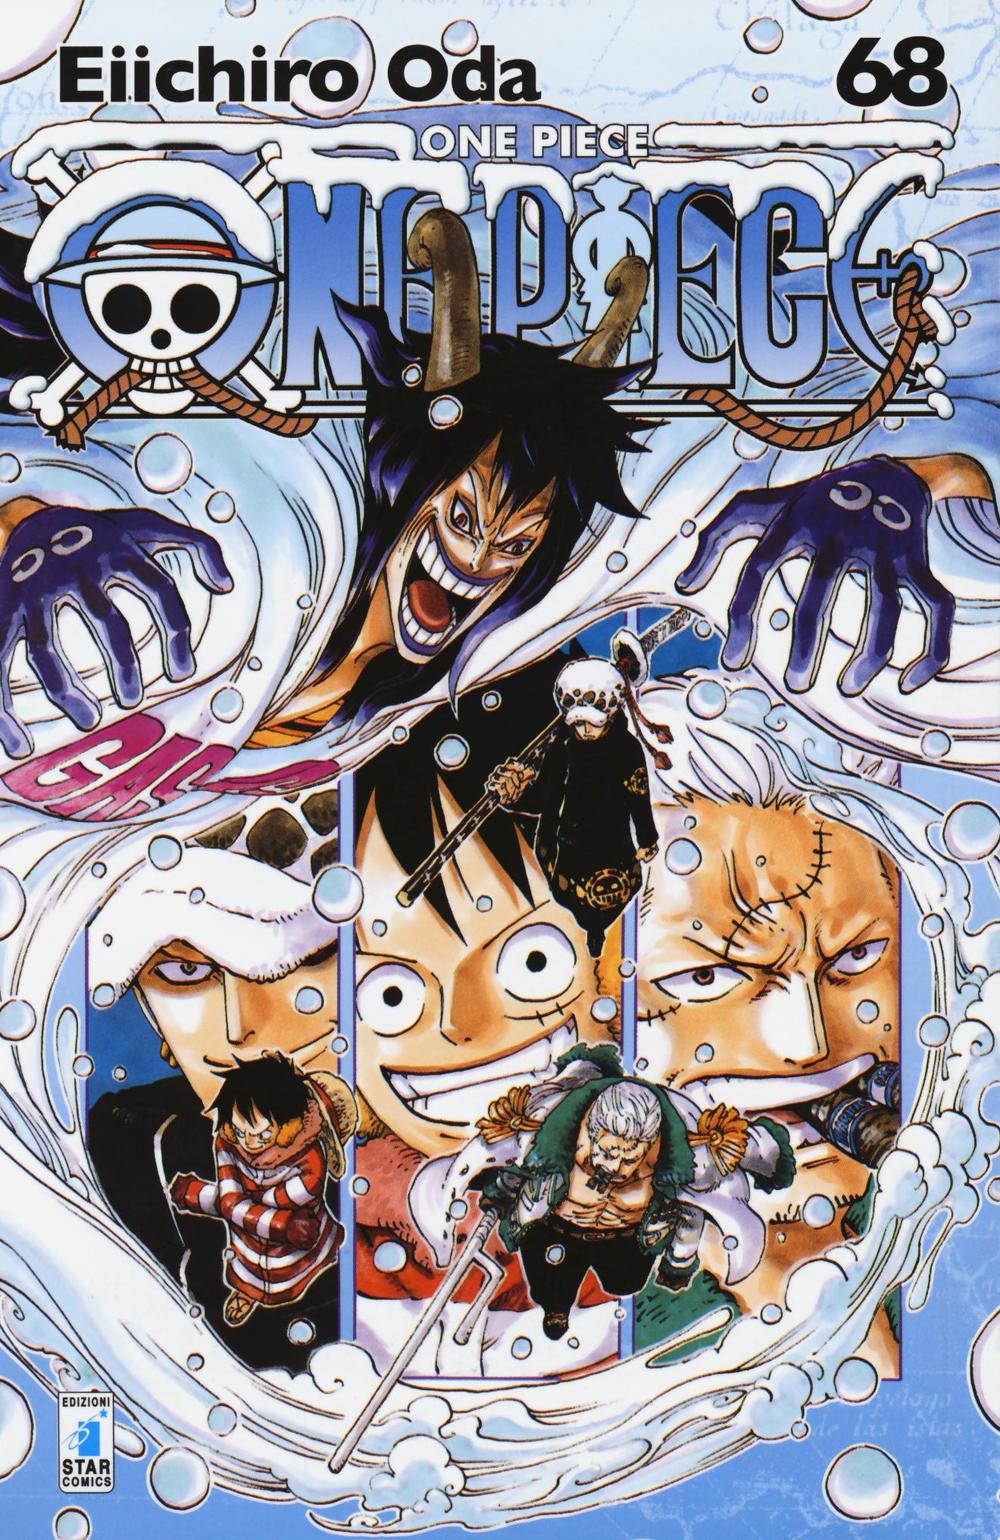 One piece. New edition. Vol. 68